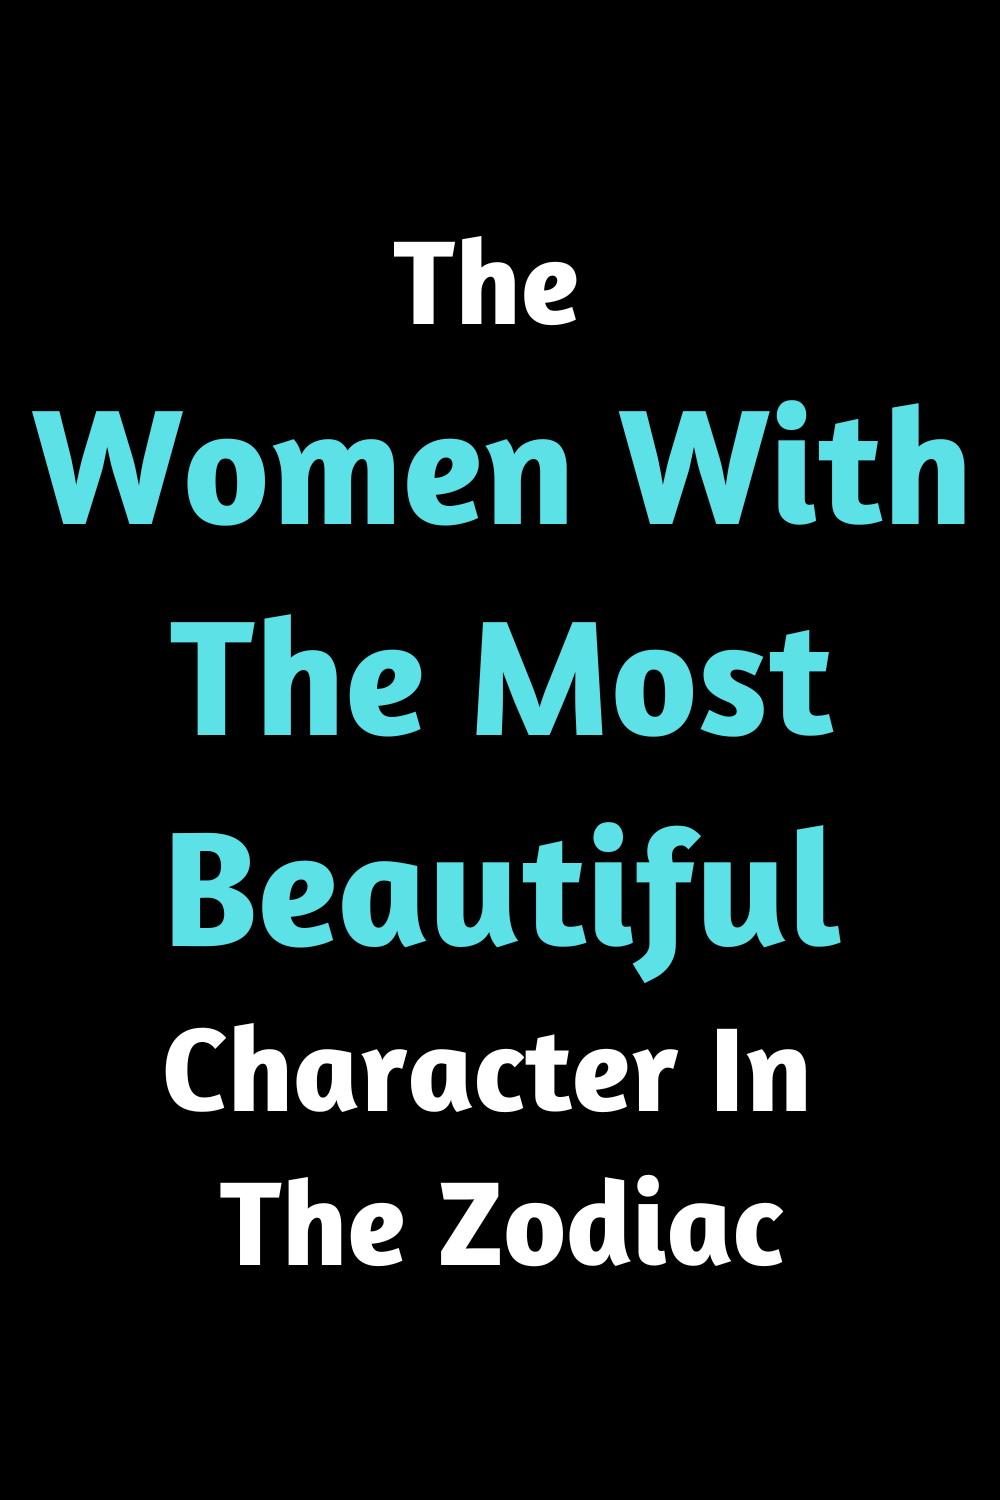 The Women With The Most Beautiful Character In The Zodiac